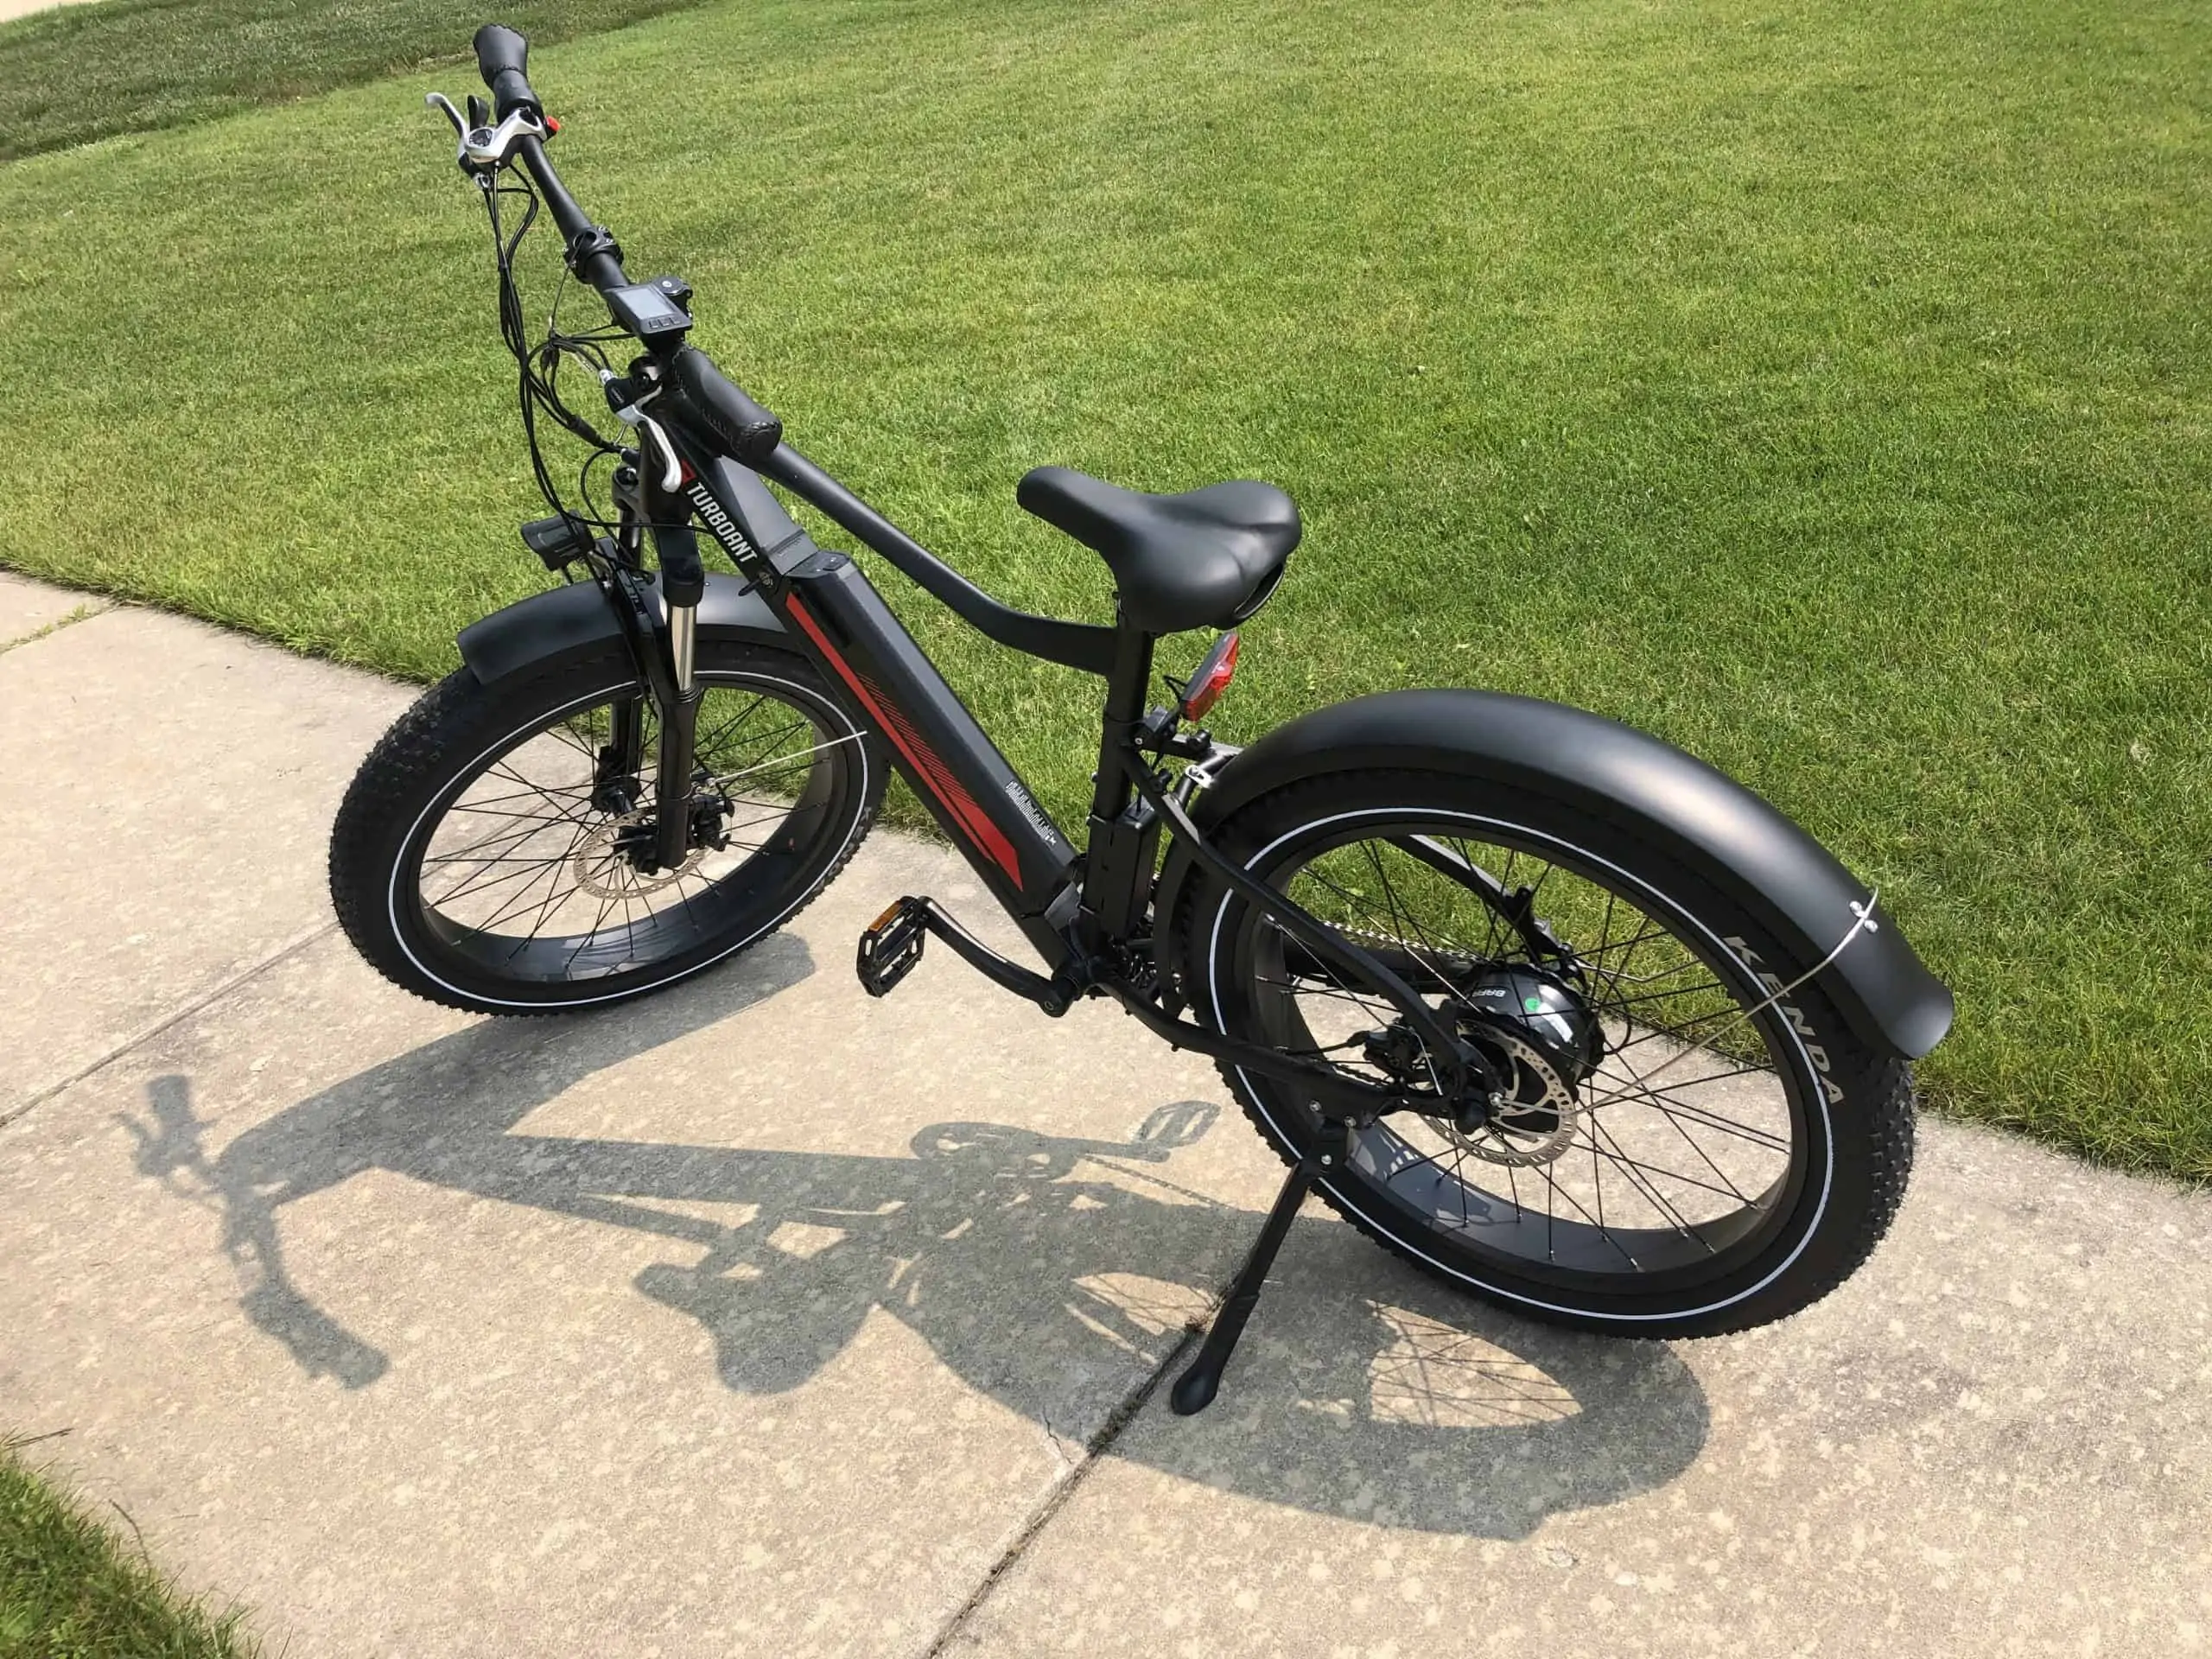 Turboant Thunder T1/N1 Fat Tire Electric Bike Review